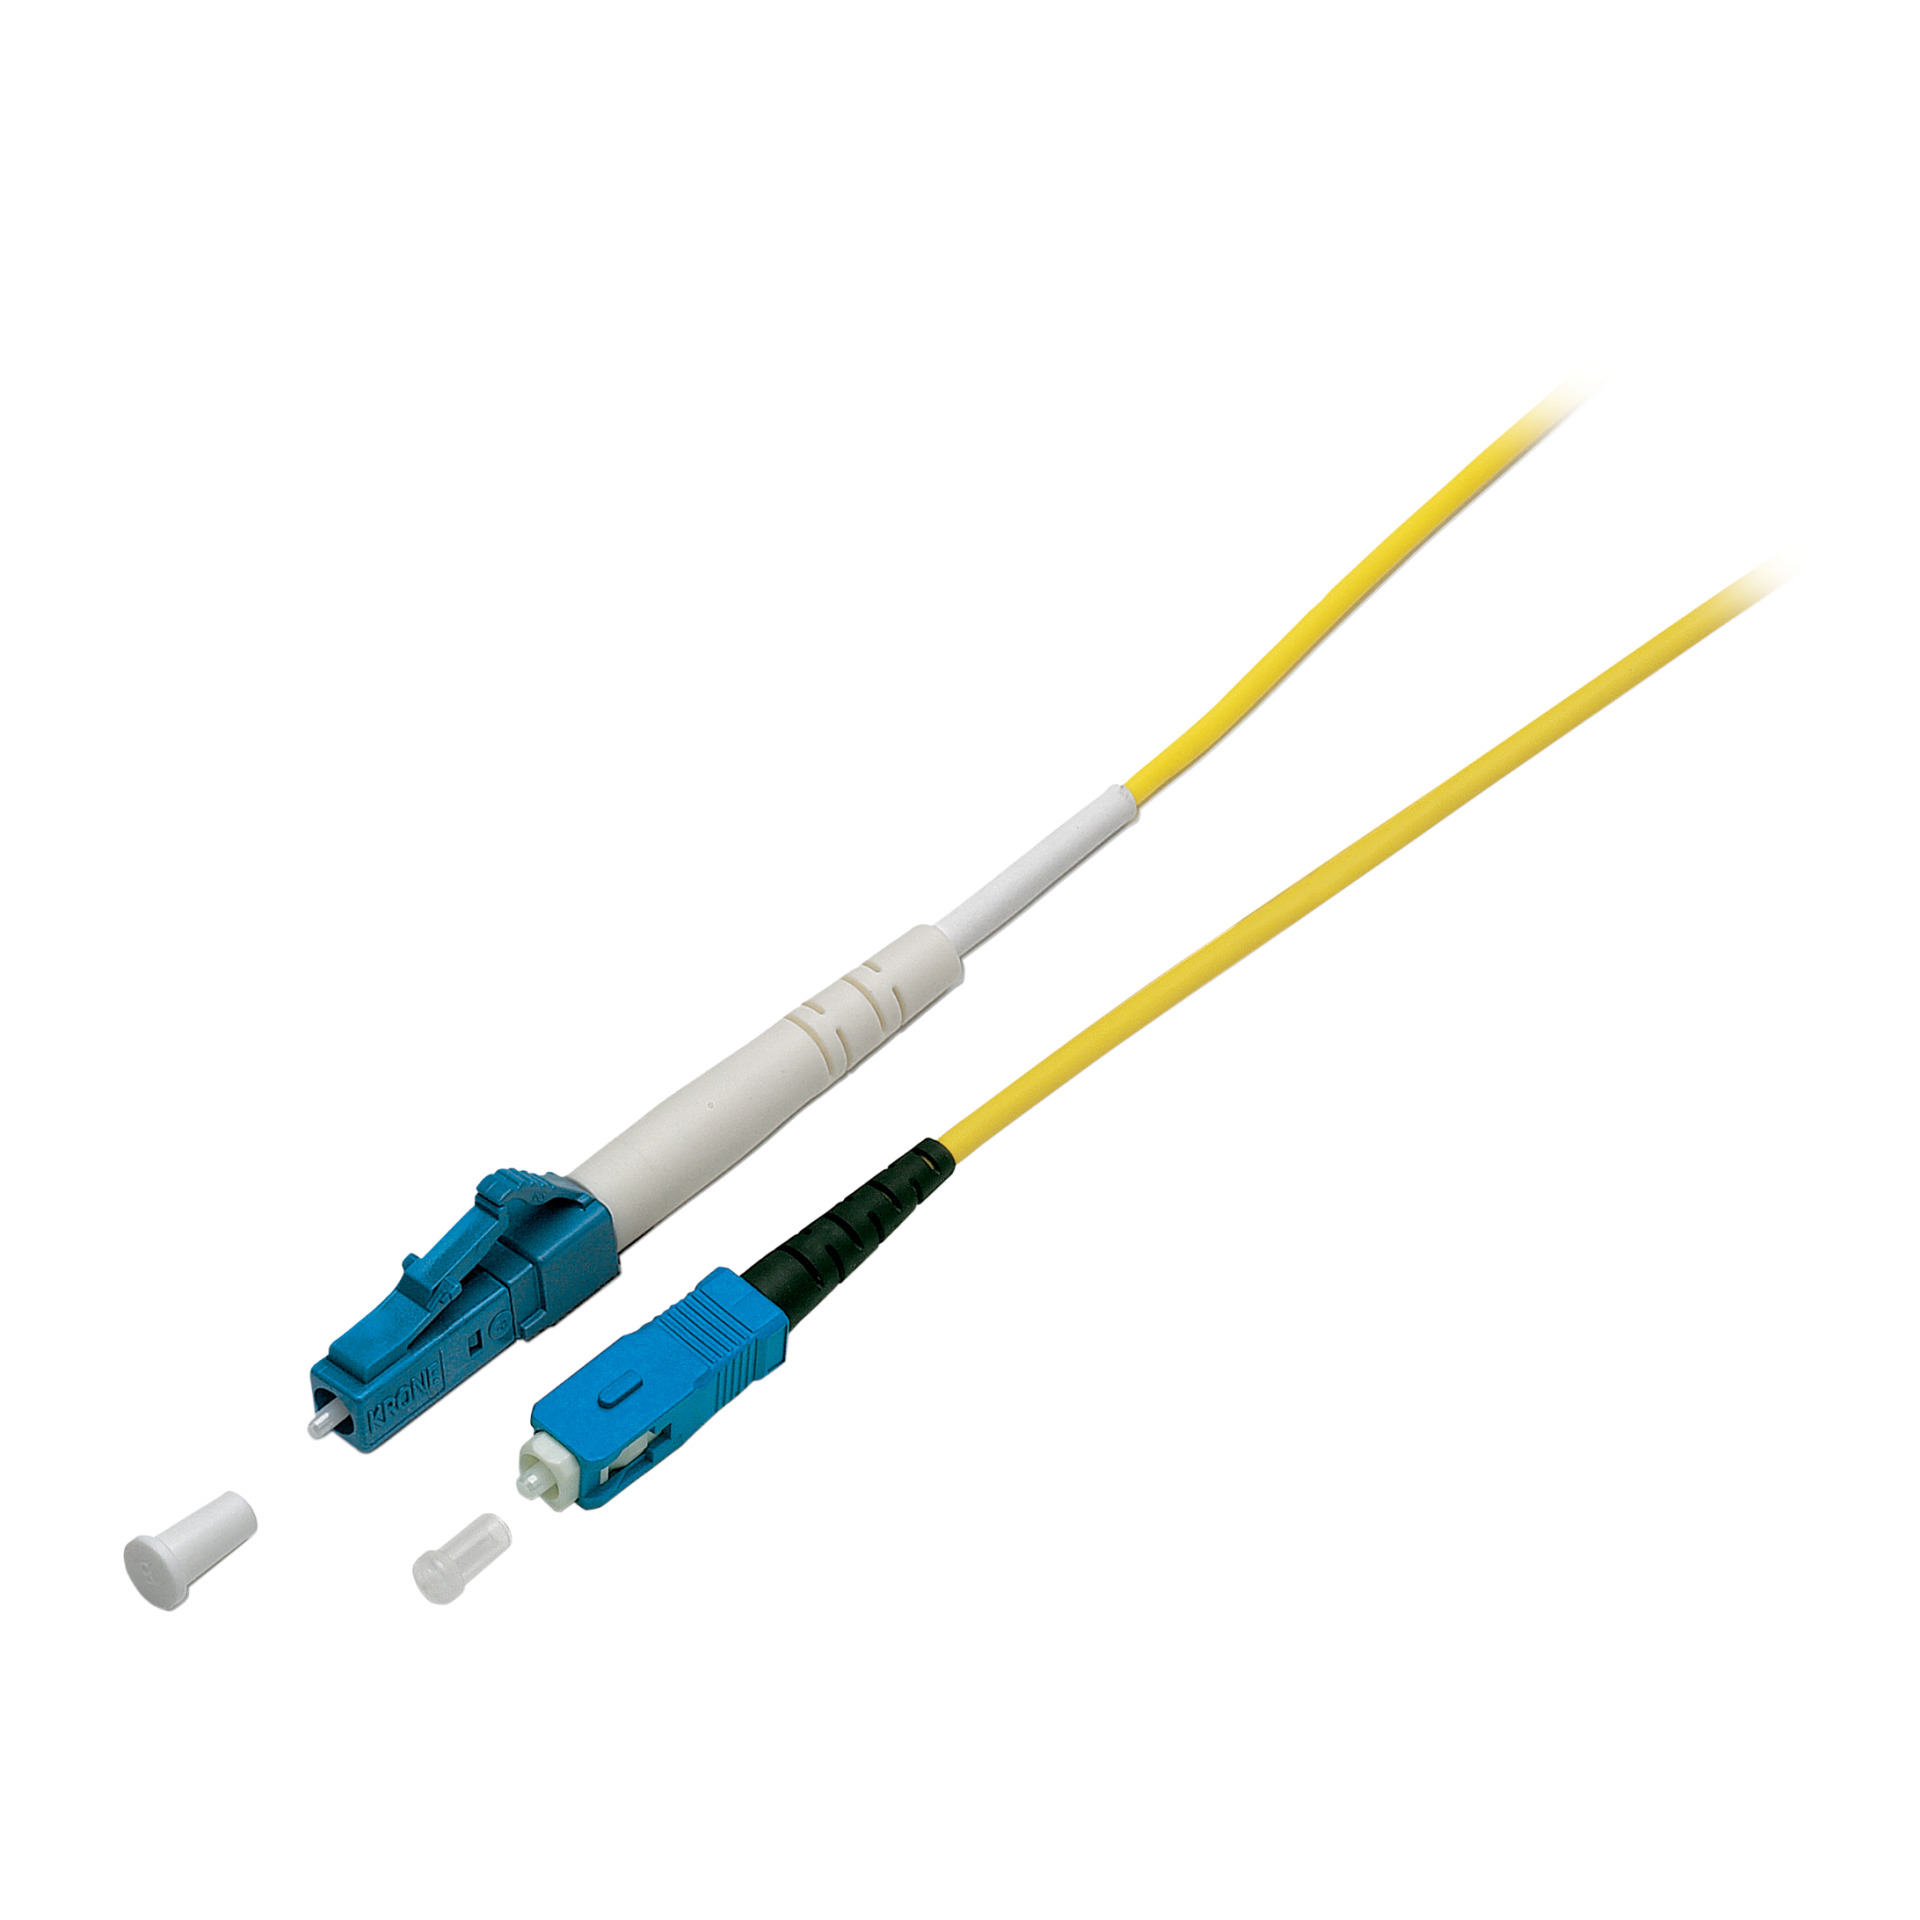 Simplex FO Patch Cable LC-SC G657.A2 1m 2,0mm yellow 9/125µm